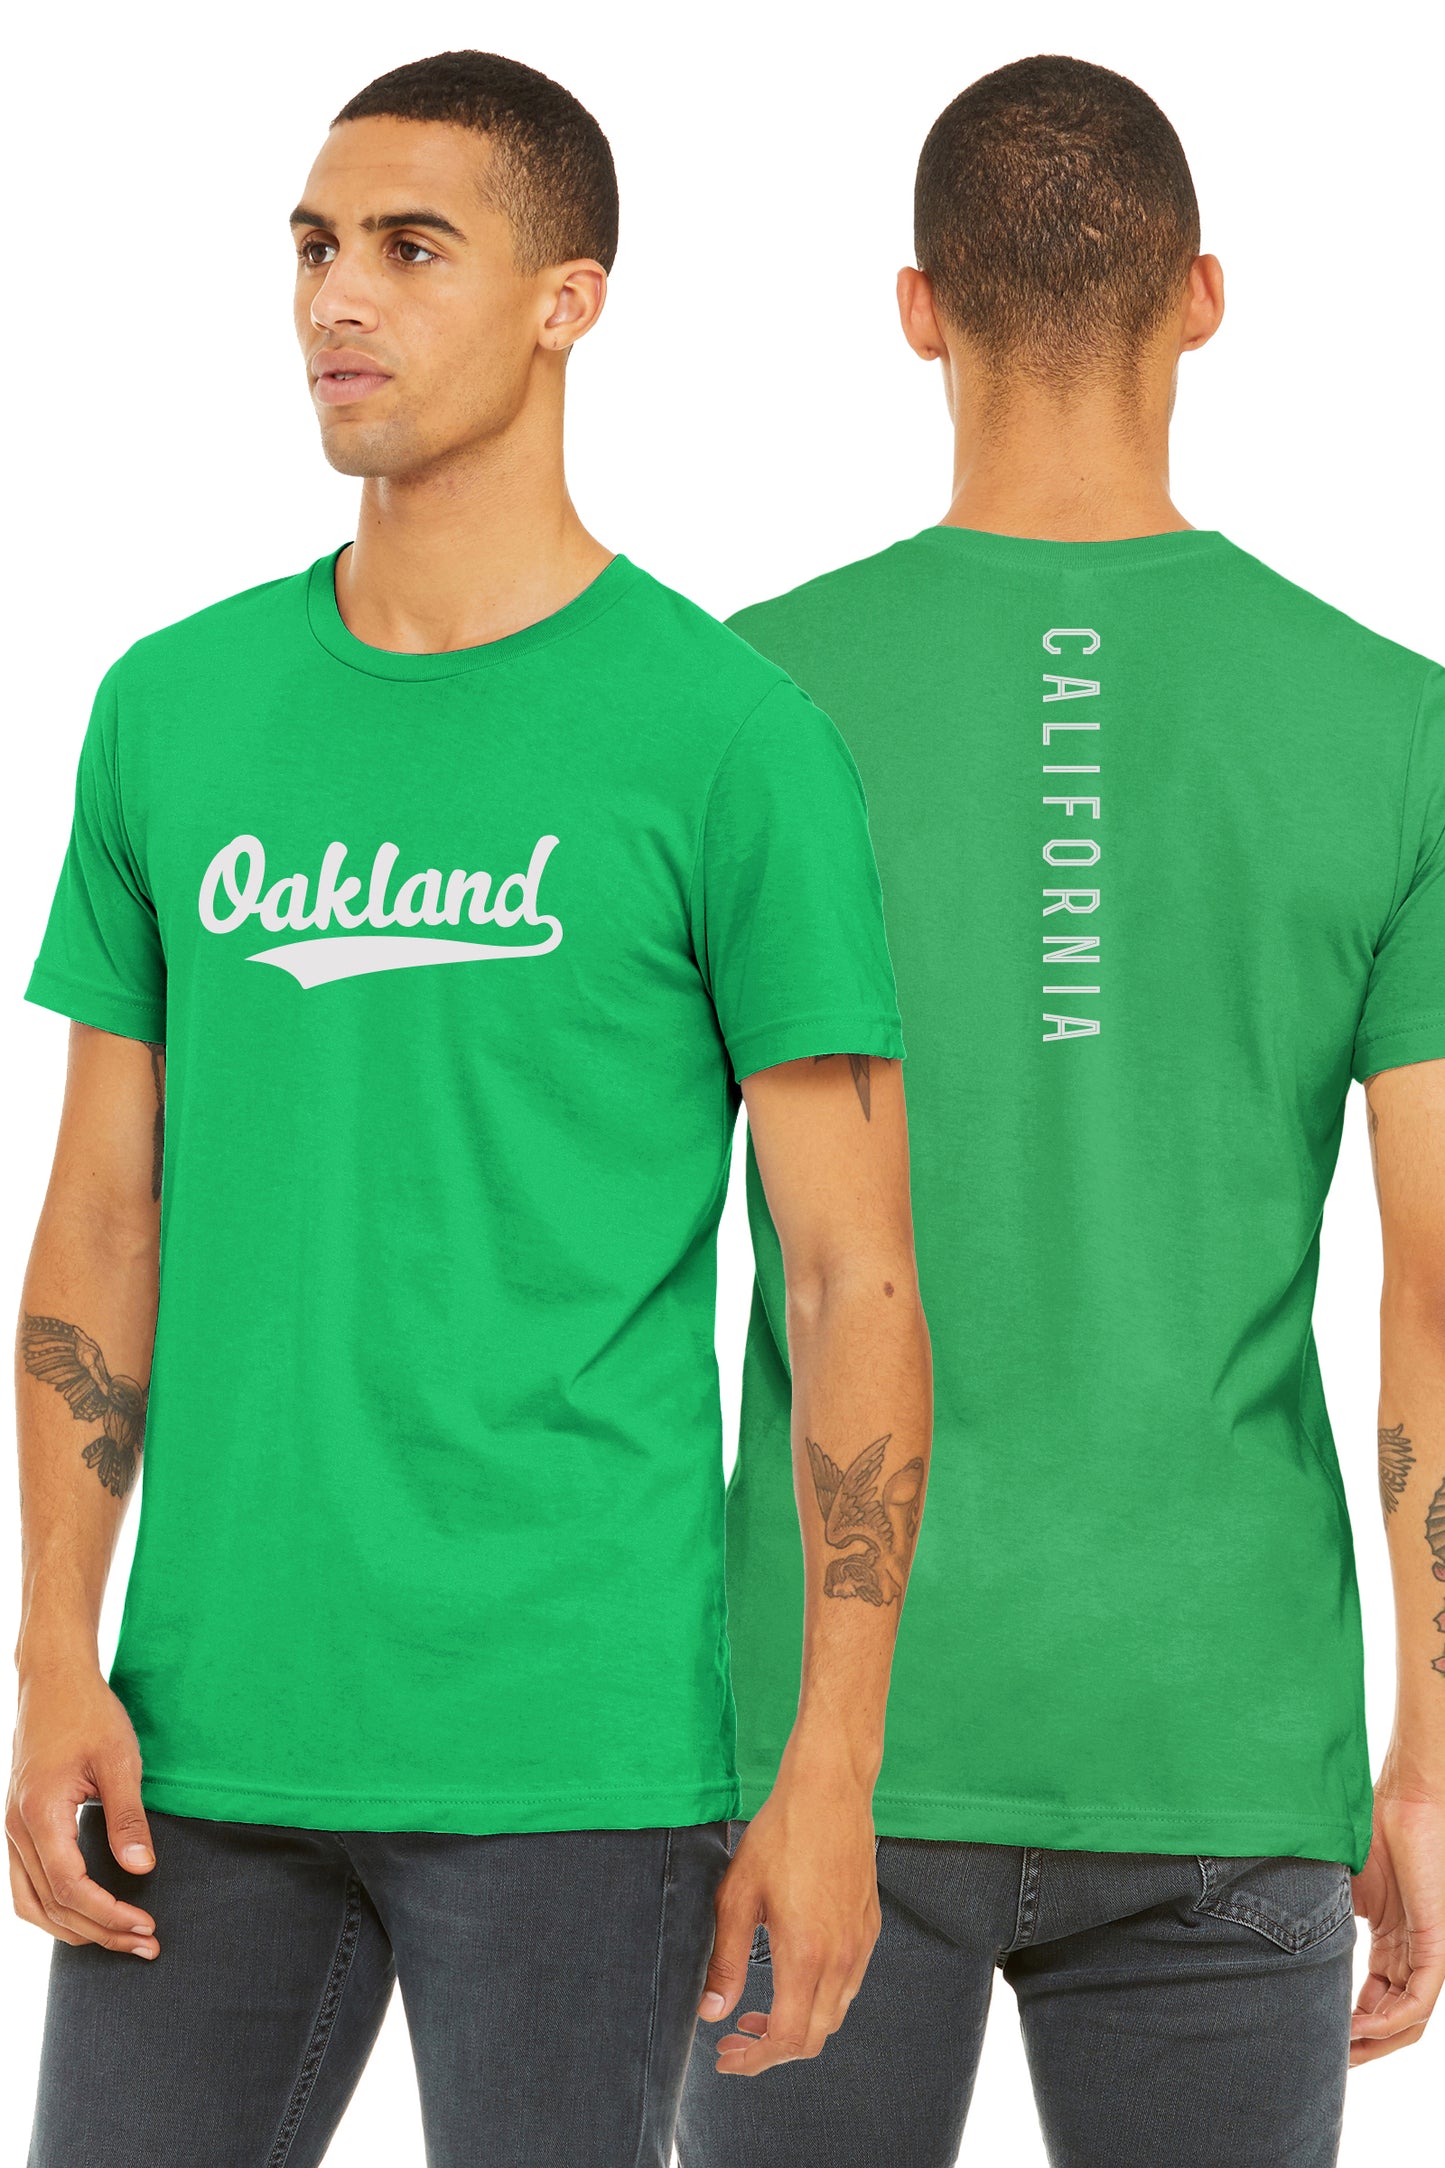 Daxton Adult Unisex Tshirt Oakland Script with California Vertical on the Back